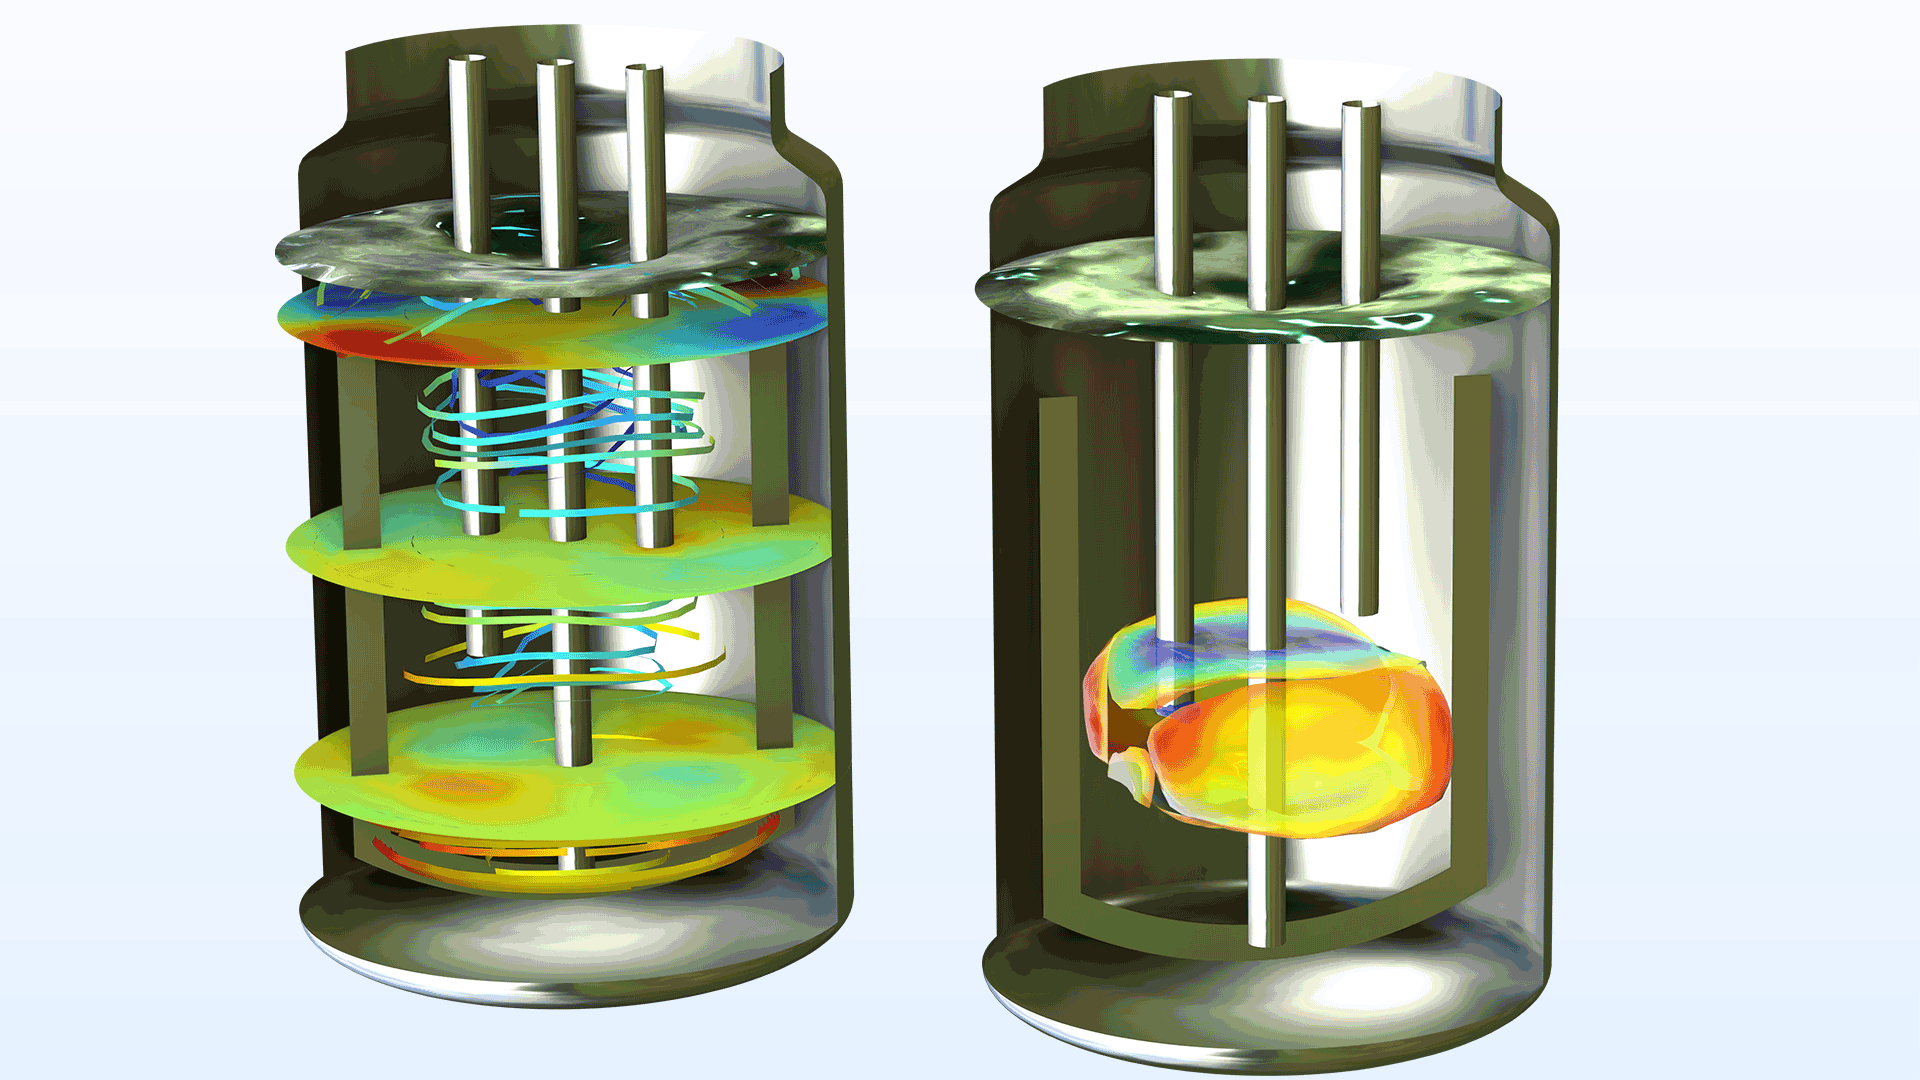 Two tank reactor models showing the concentration in the Rainbow color table.